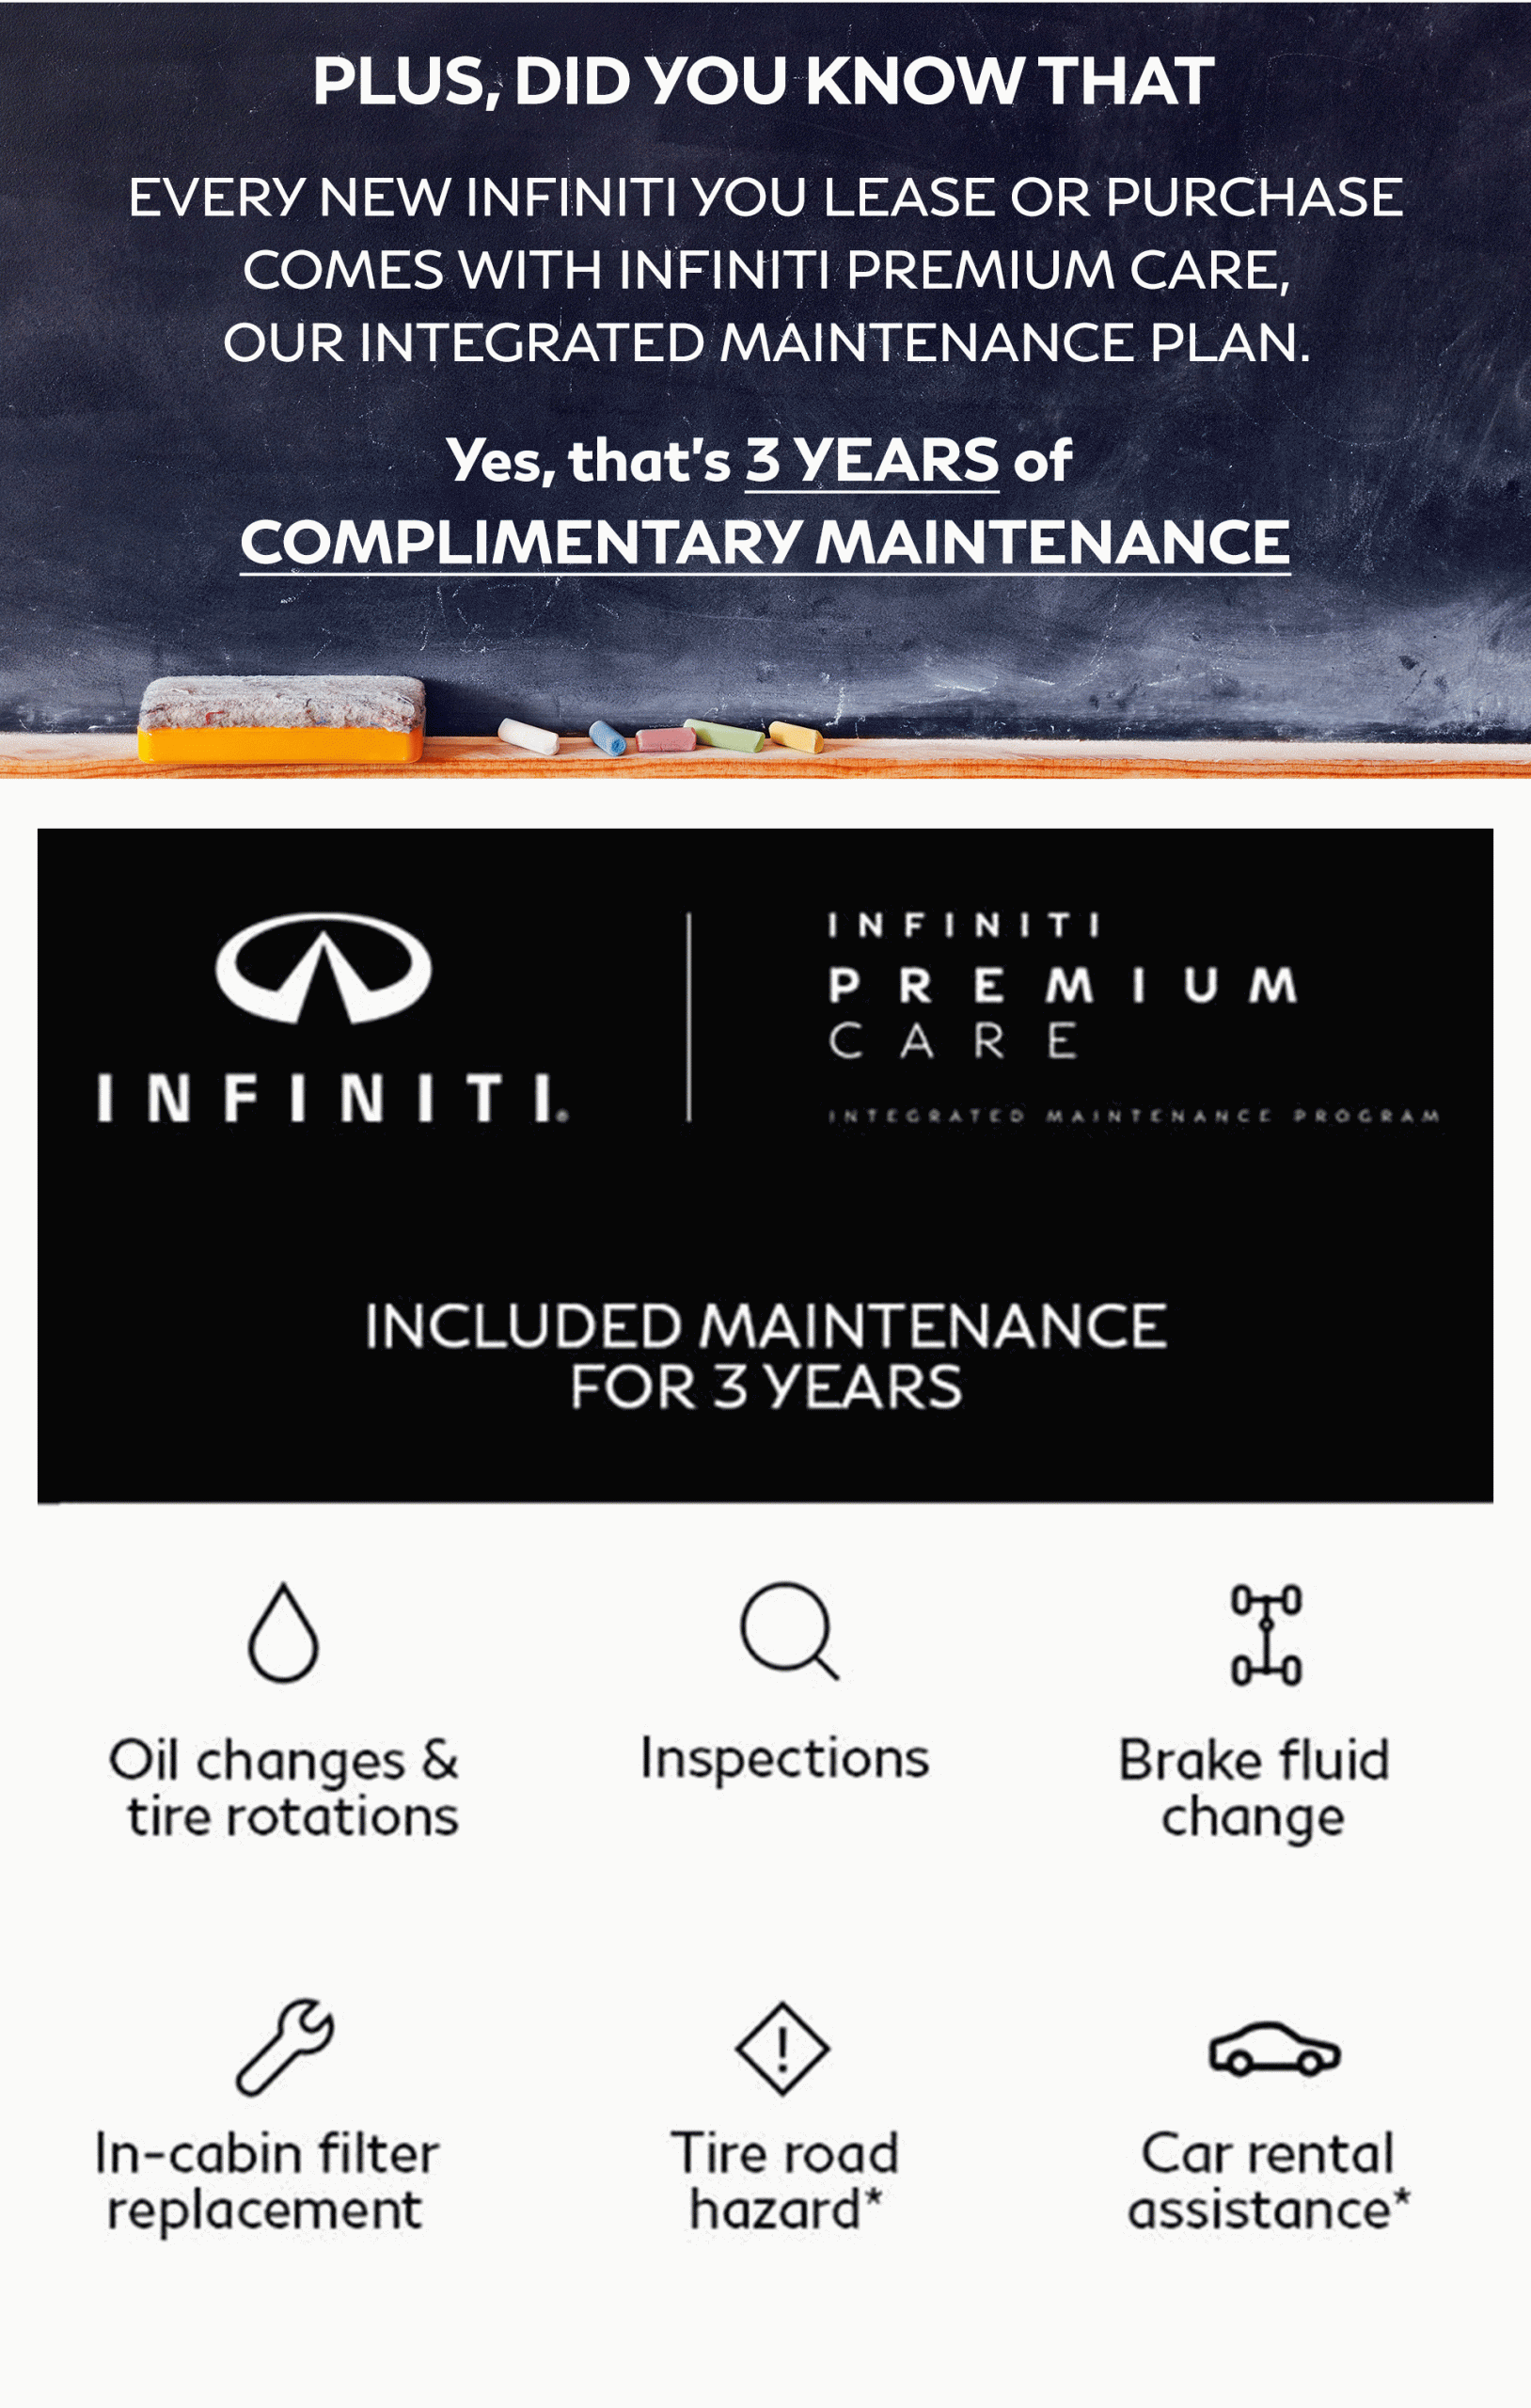 Learn more about our COMPLIMENTARY MAINTENANCE program.